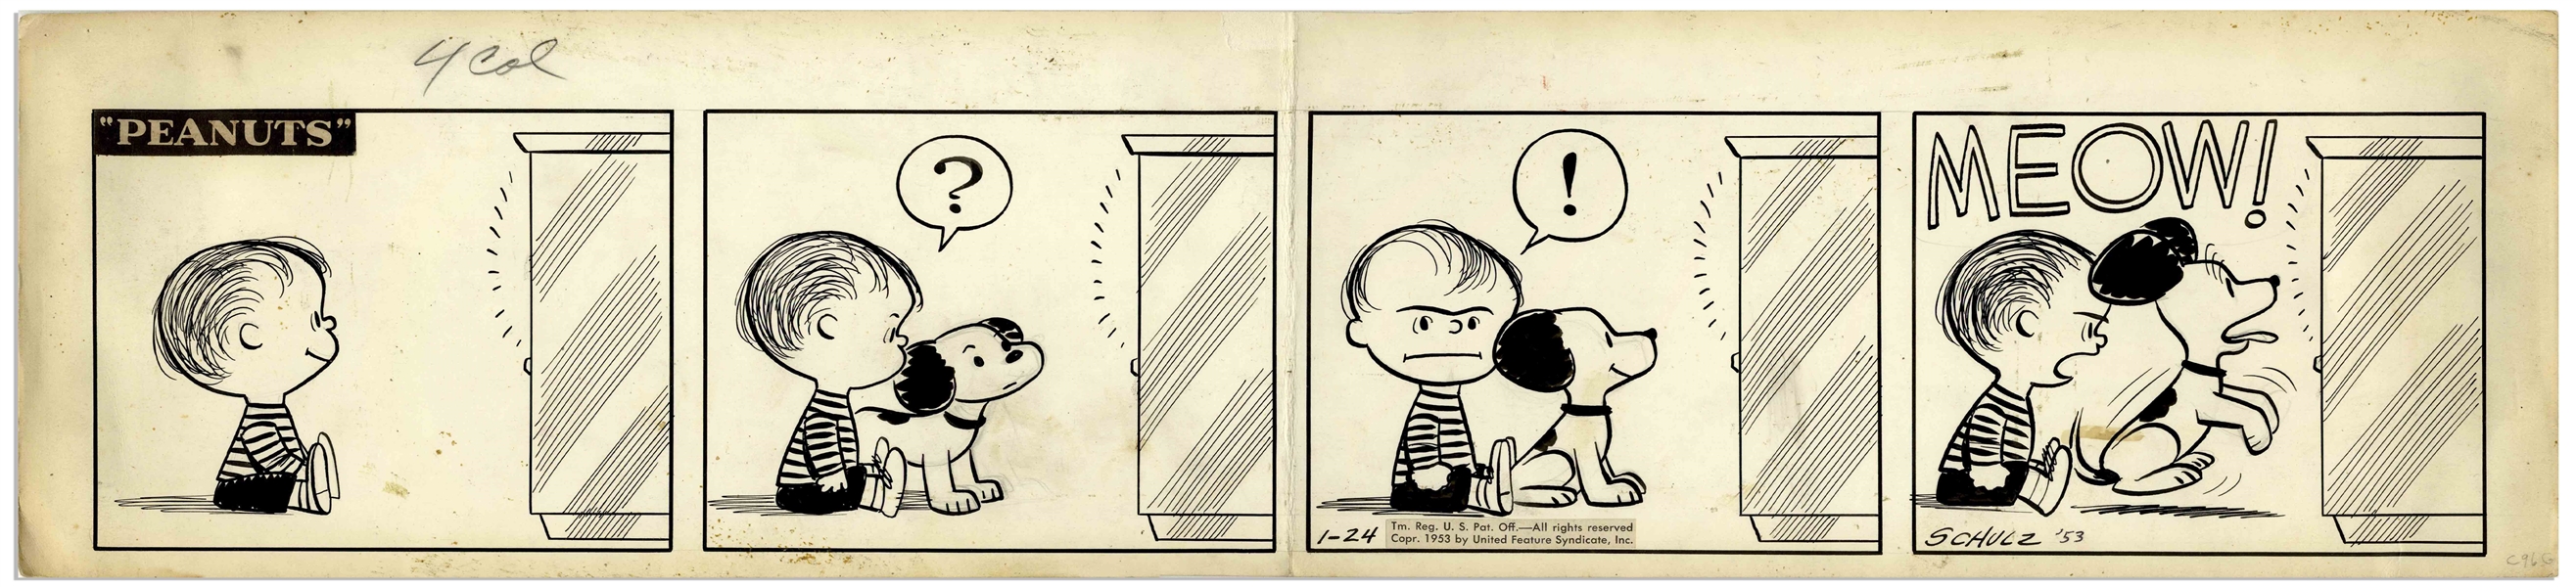 Charles Schulz Original Hand-Drawn Peanuts Comic Strip From January 1953 -- In this Early Strip, Linus & Snoopy Battle Over the TV & Linus Is Shown Without His Blanket